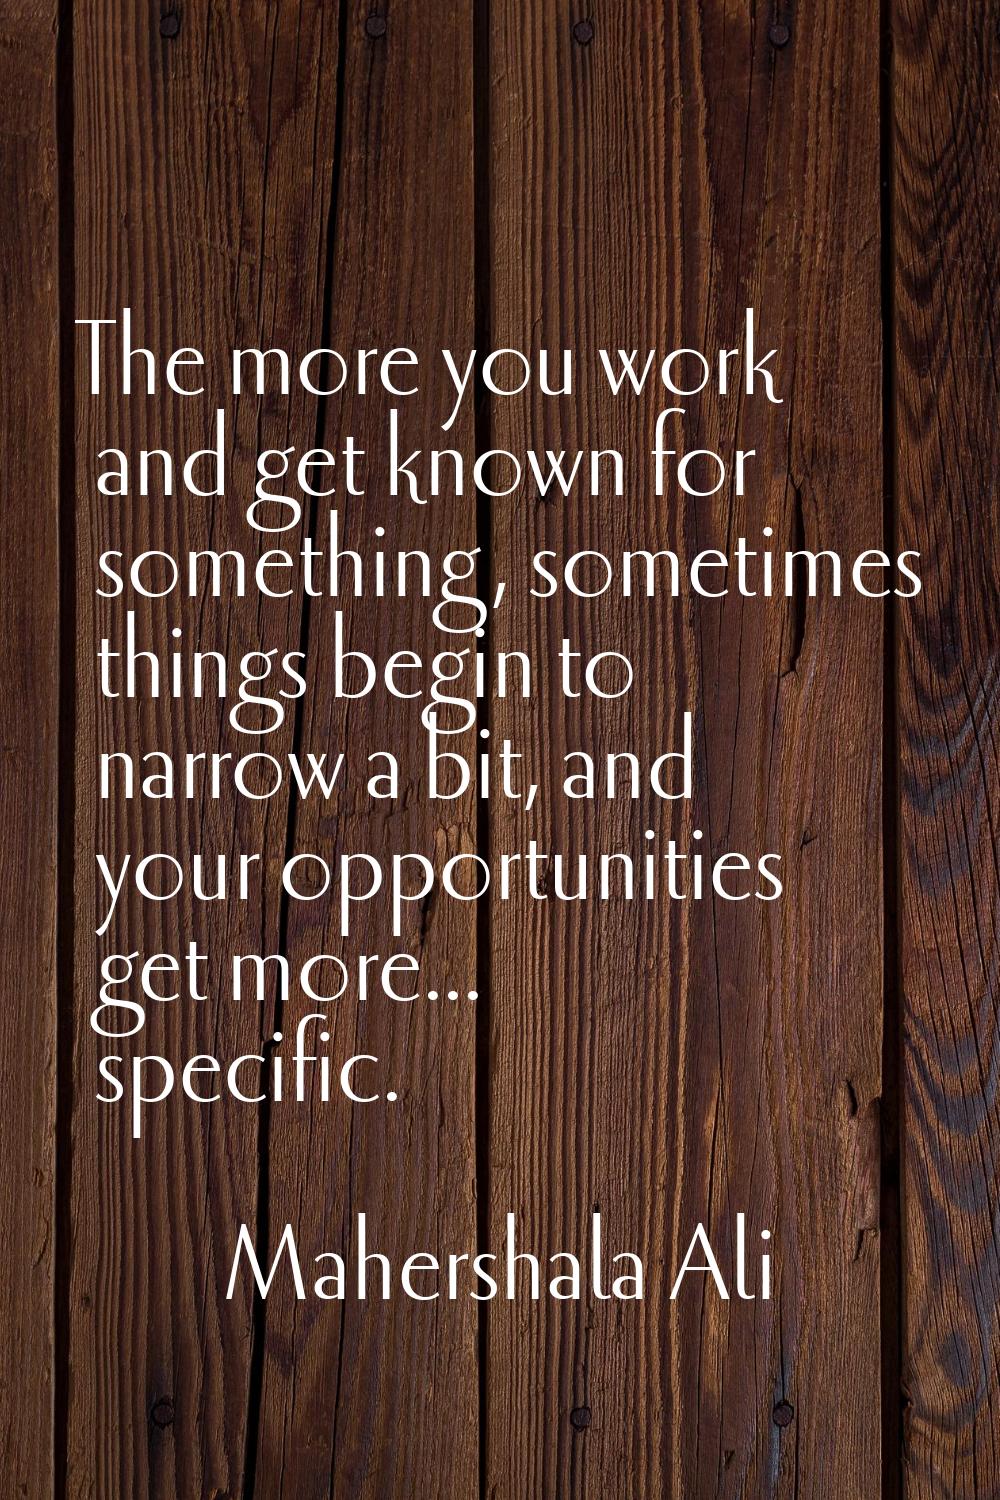 The more you work and get known for something, sometimes things begin to narrow a bit, and your opp